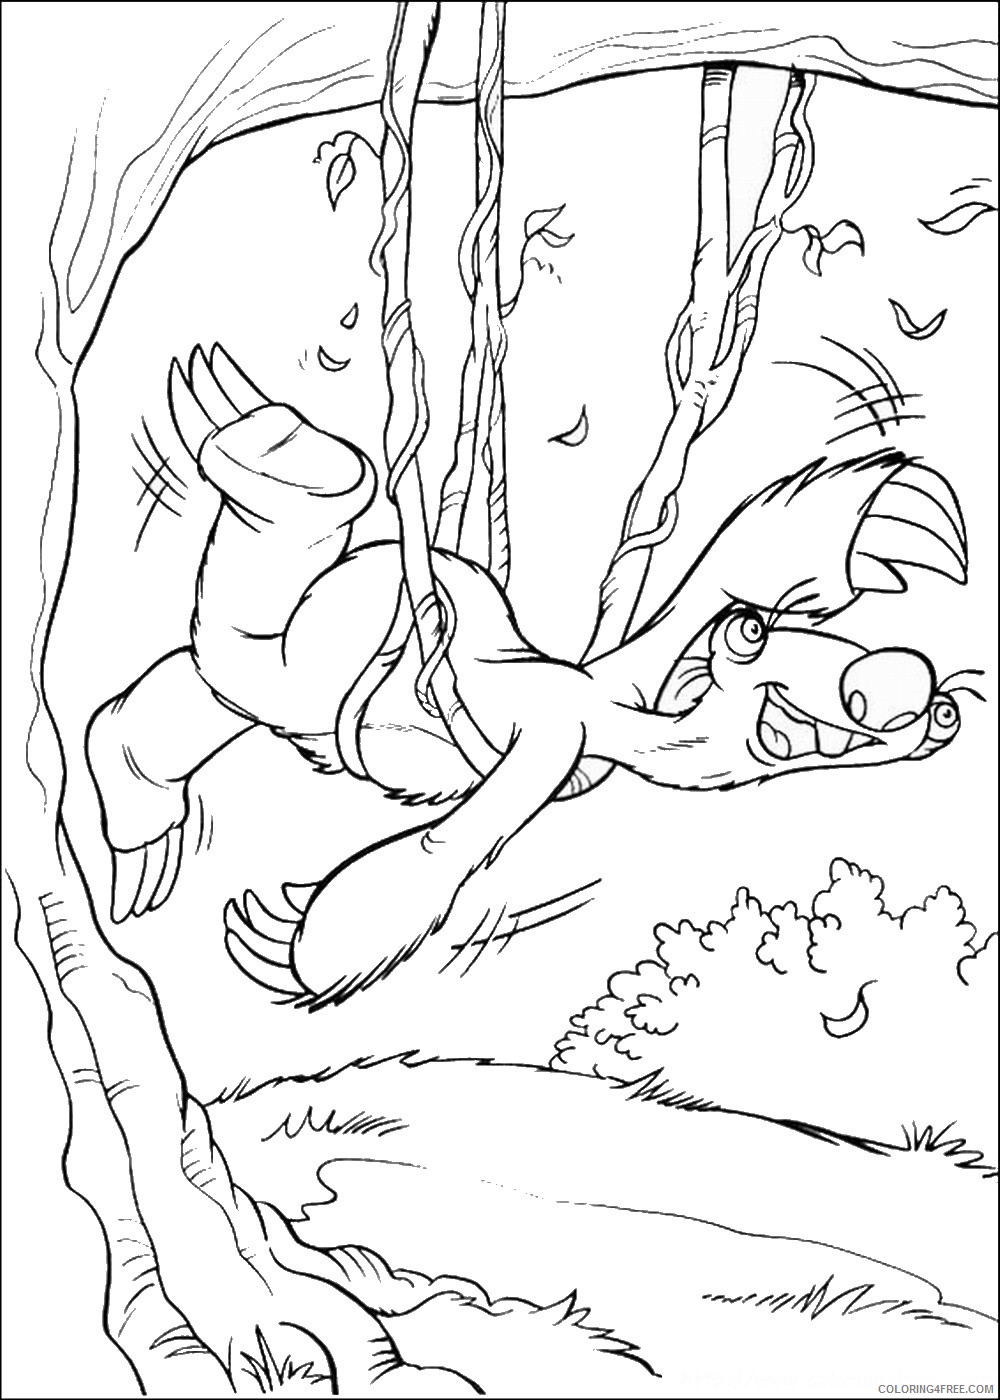 Ice Age Coloring Pages Cartoons ice age 07 Printable 2020 3378 Coloring4free